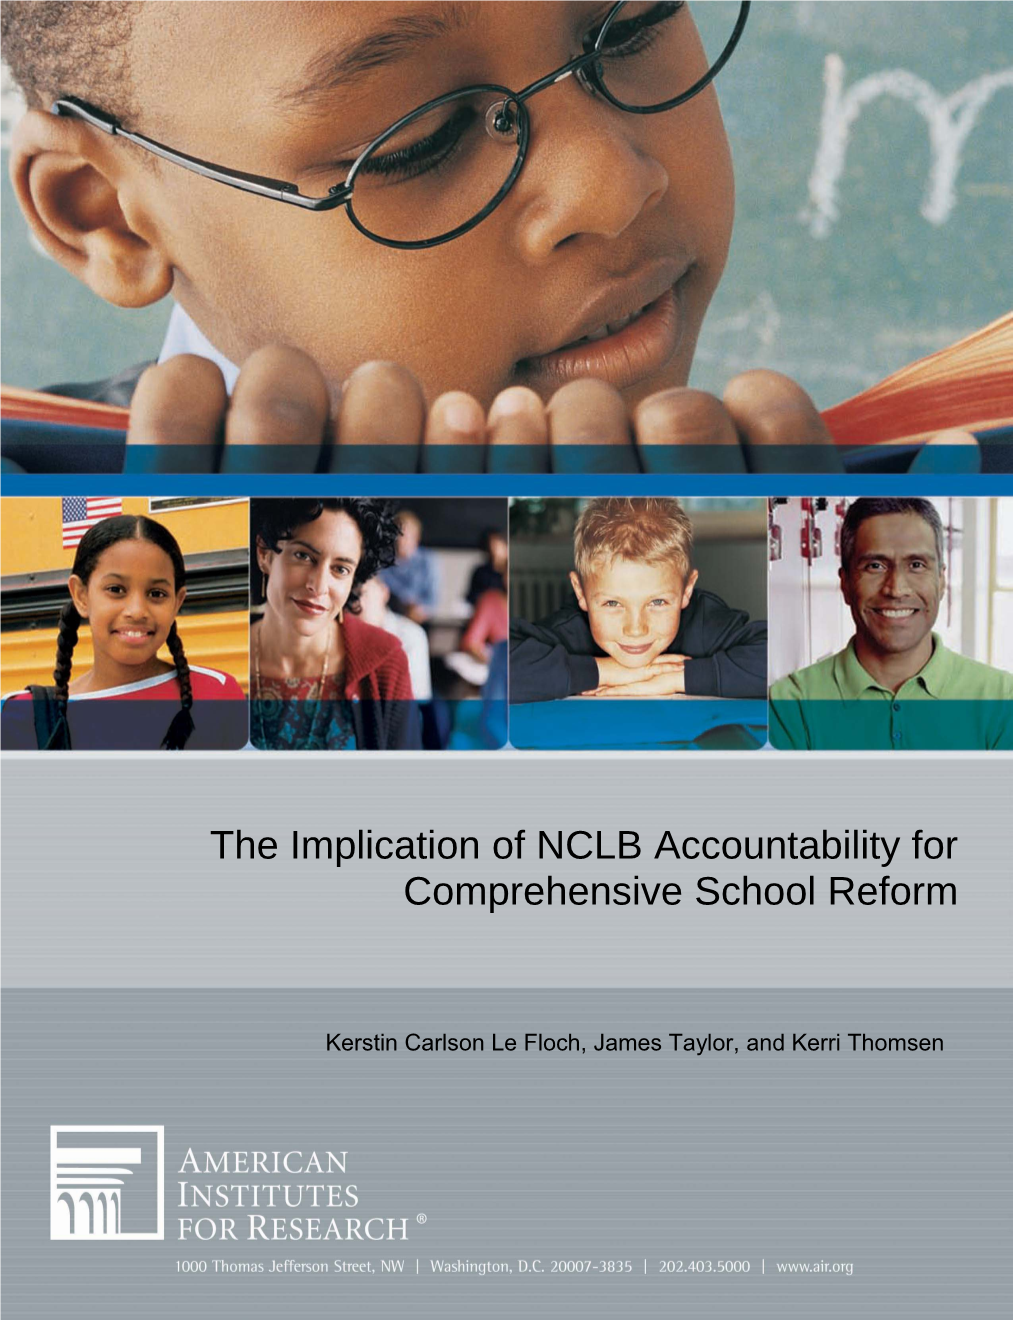 The Implications of Nclb Accountability for Comprehensive School Reform